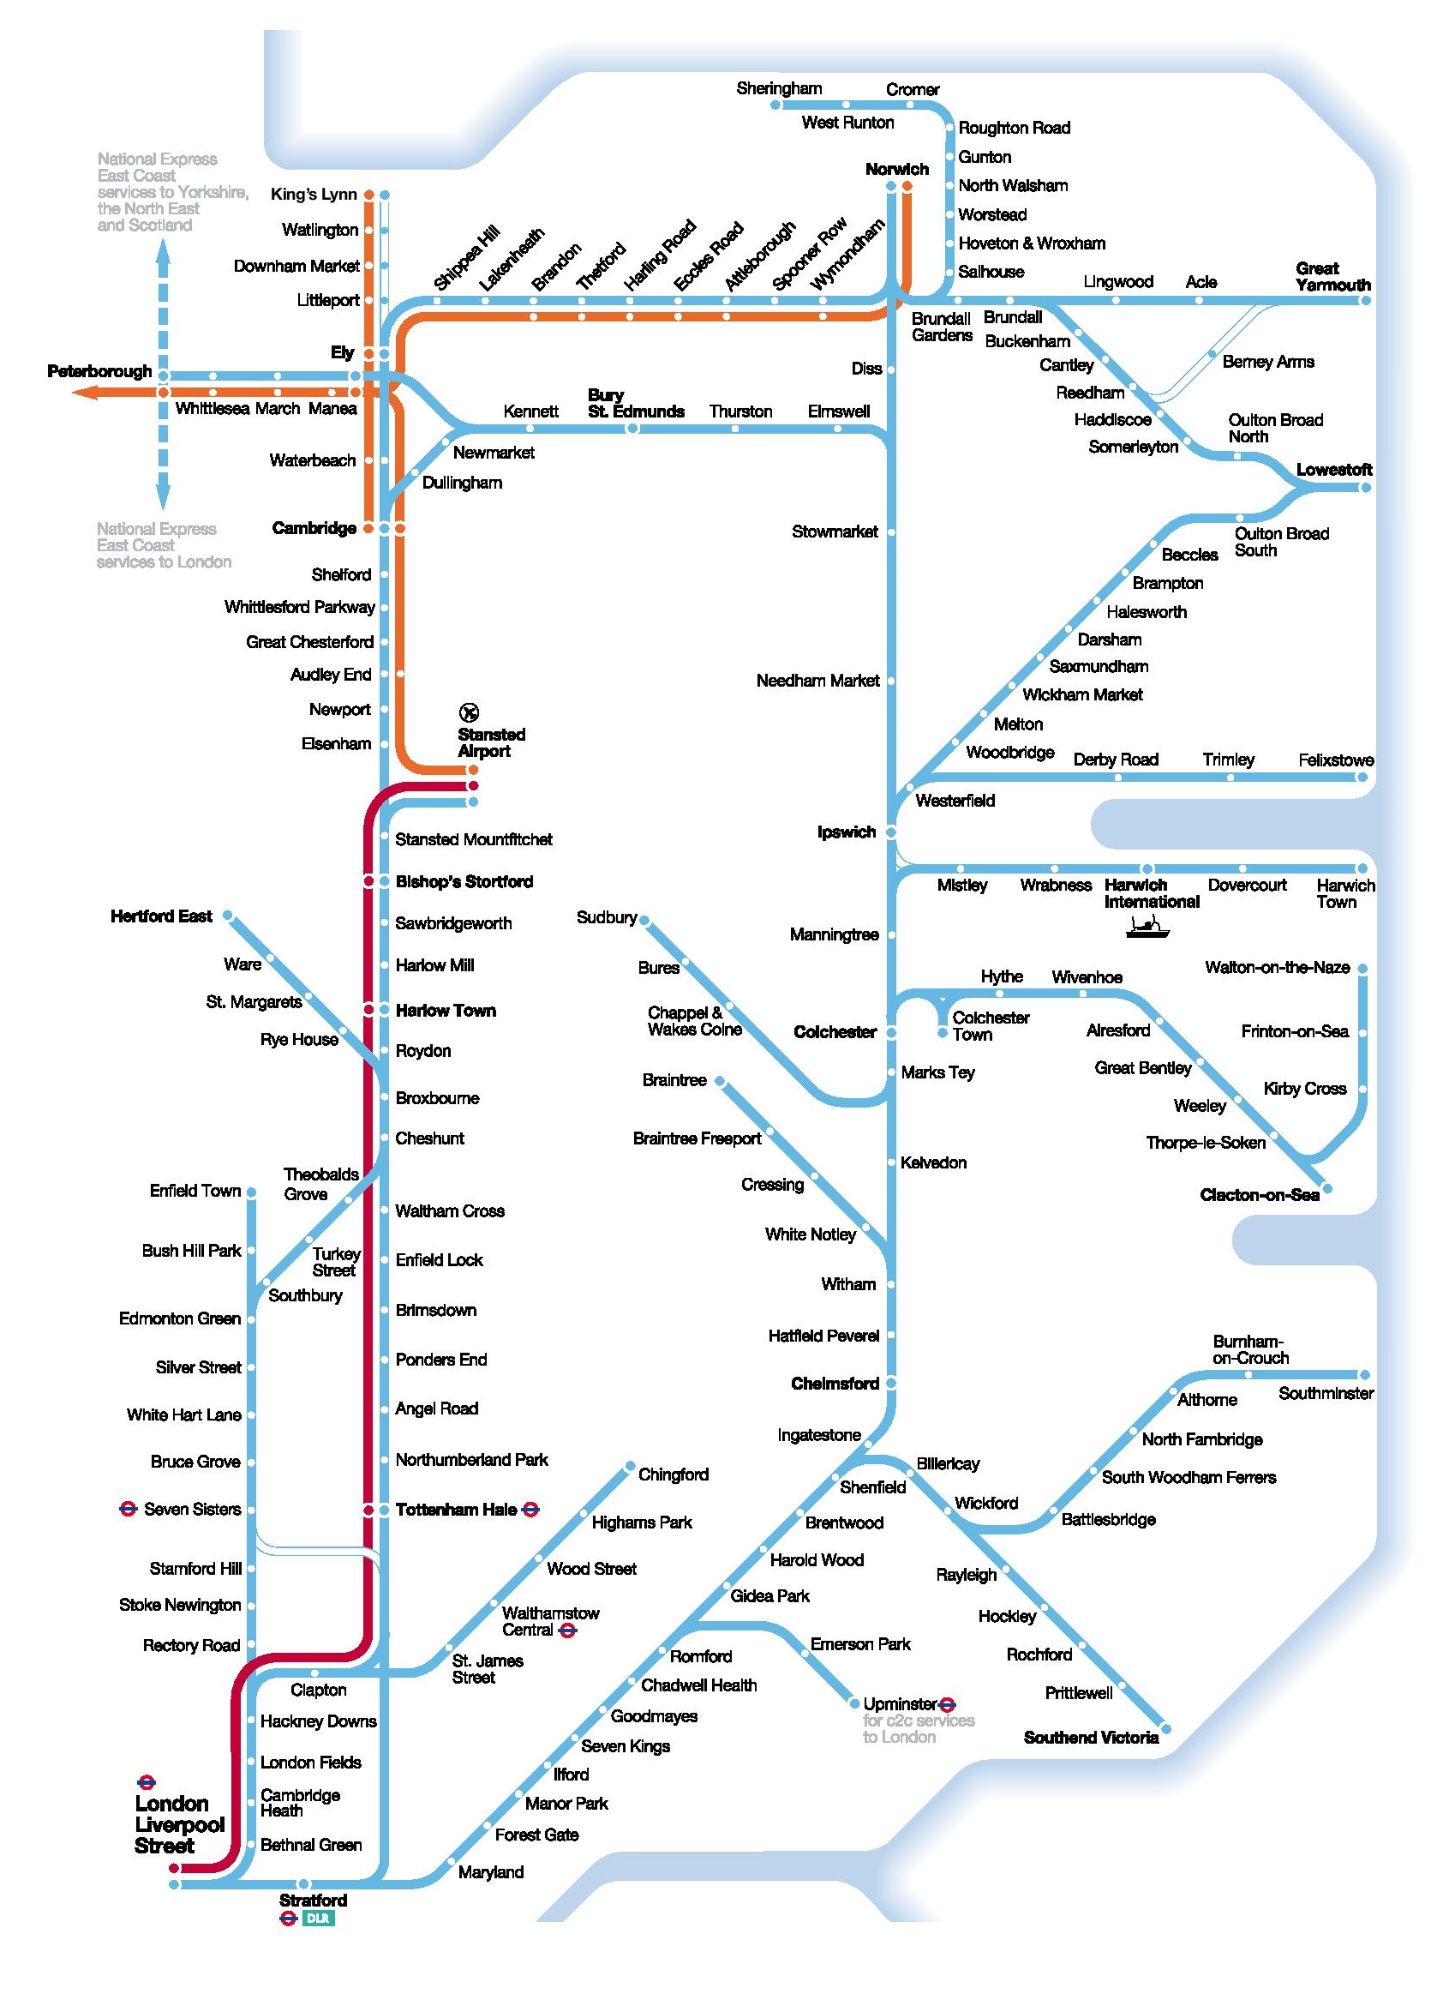 Image showing the National Express East Anglia route map circa 2011.